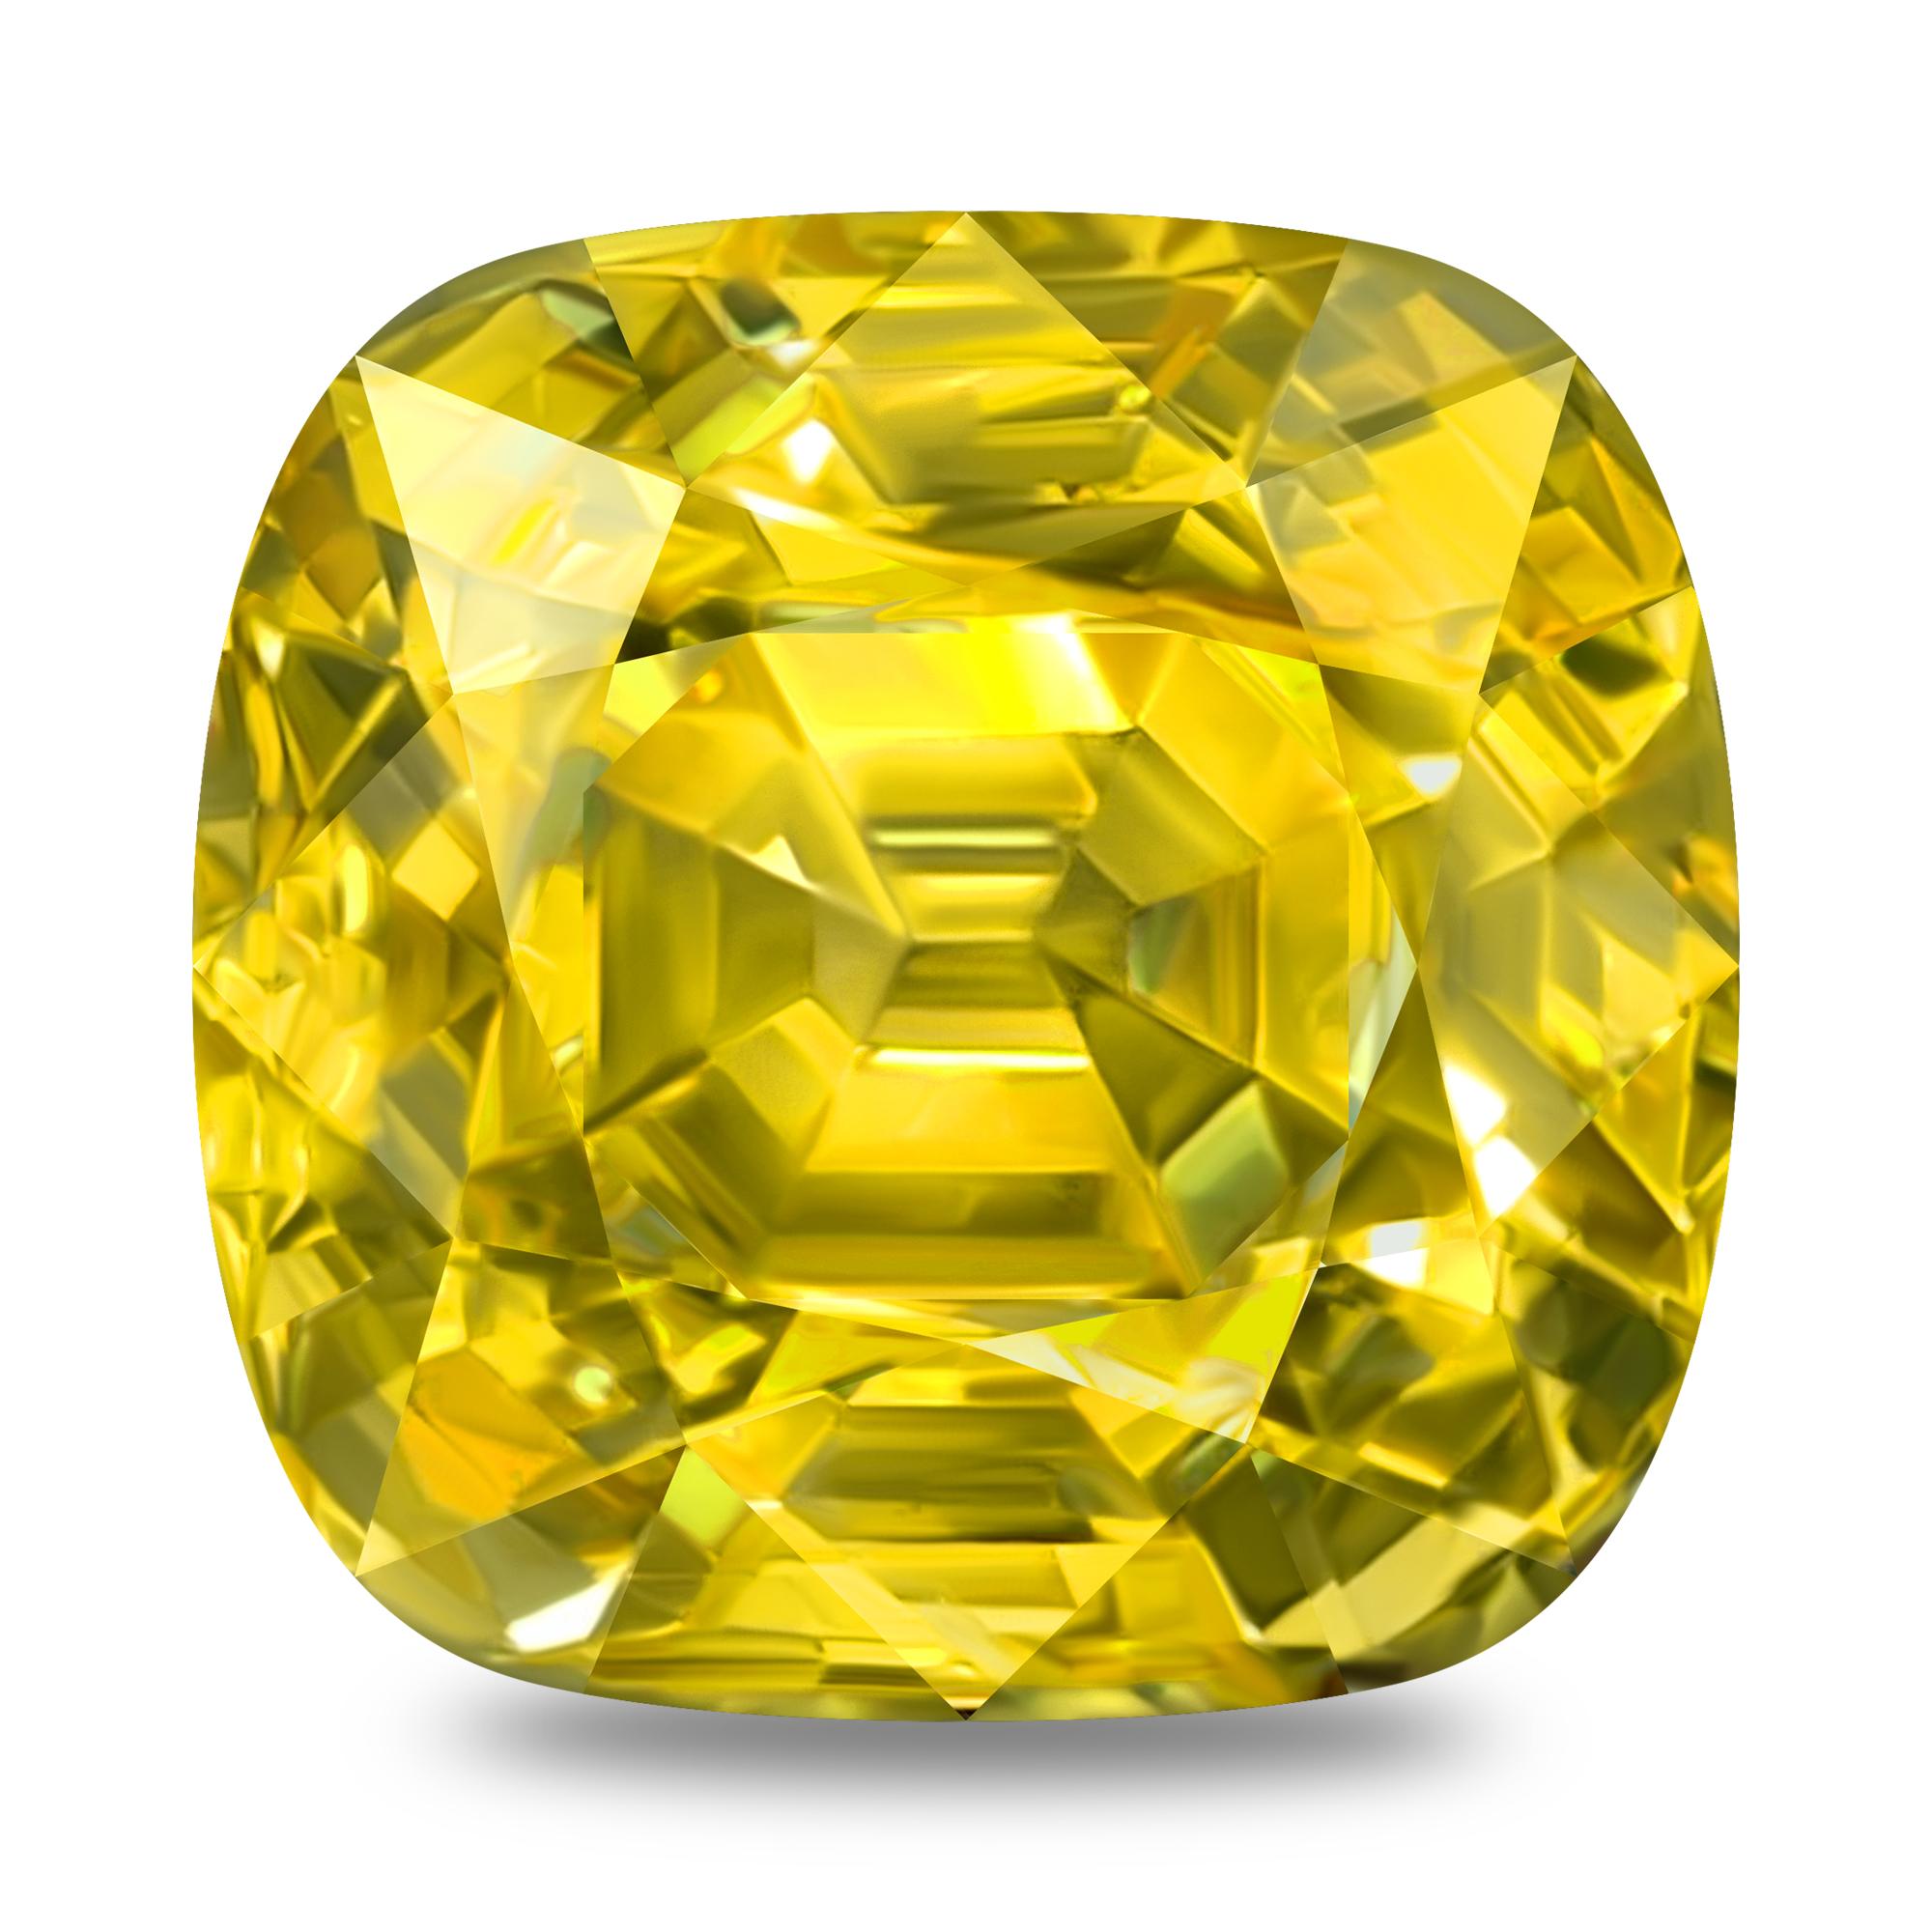 Sri Lanka is one of the best gemstone sources in the world.
Especially if we are speaking about yellow sapphires. 
This stone is one of the best samples of Srilankan yellow sapphires in this size. 
It is big in size, eye clean, natural, has no